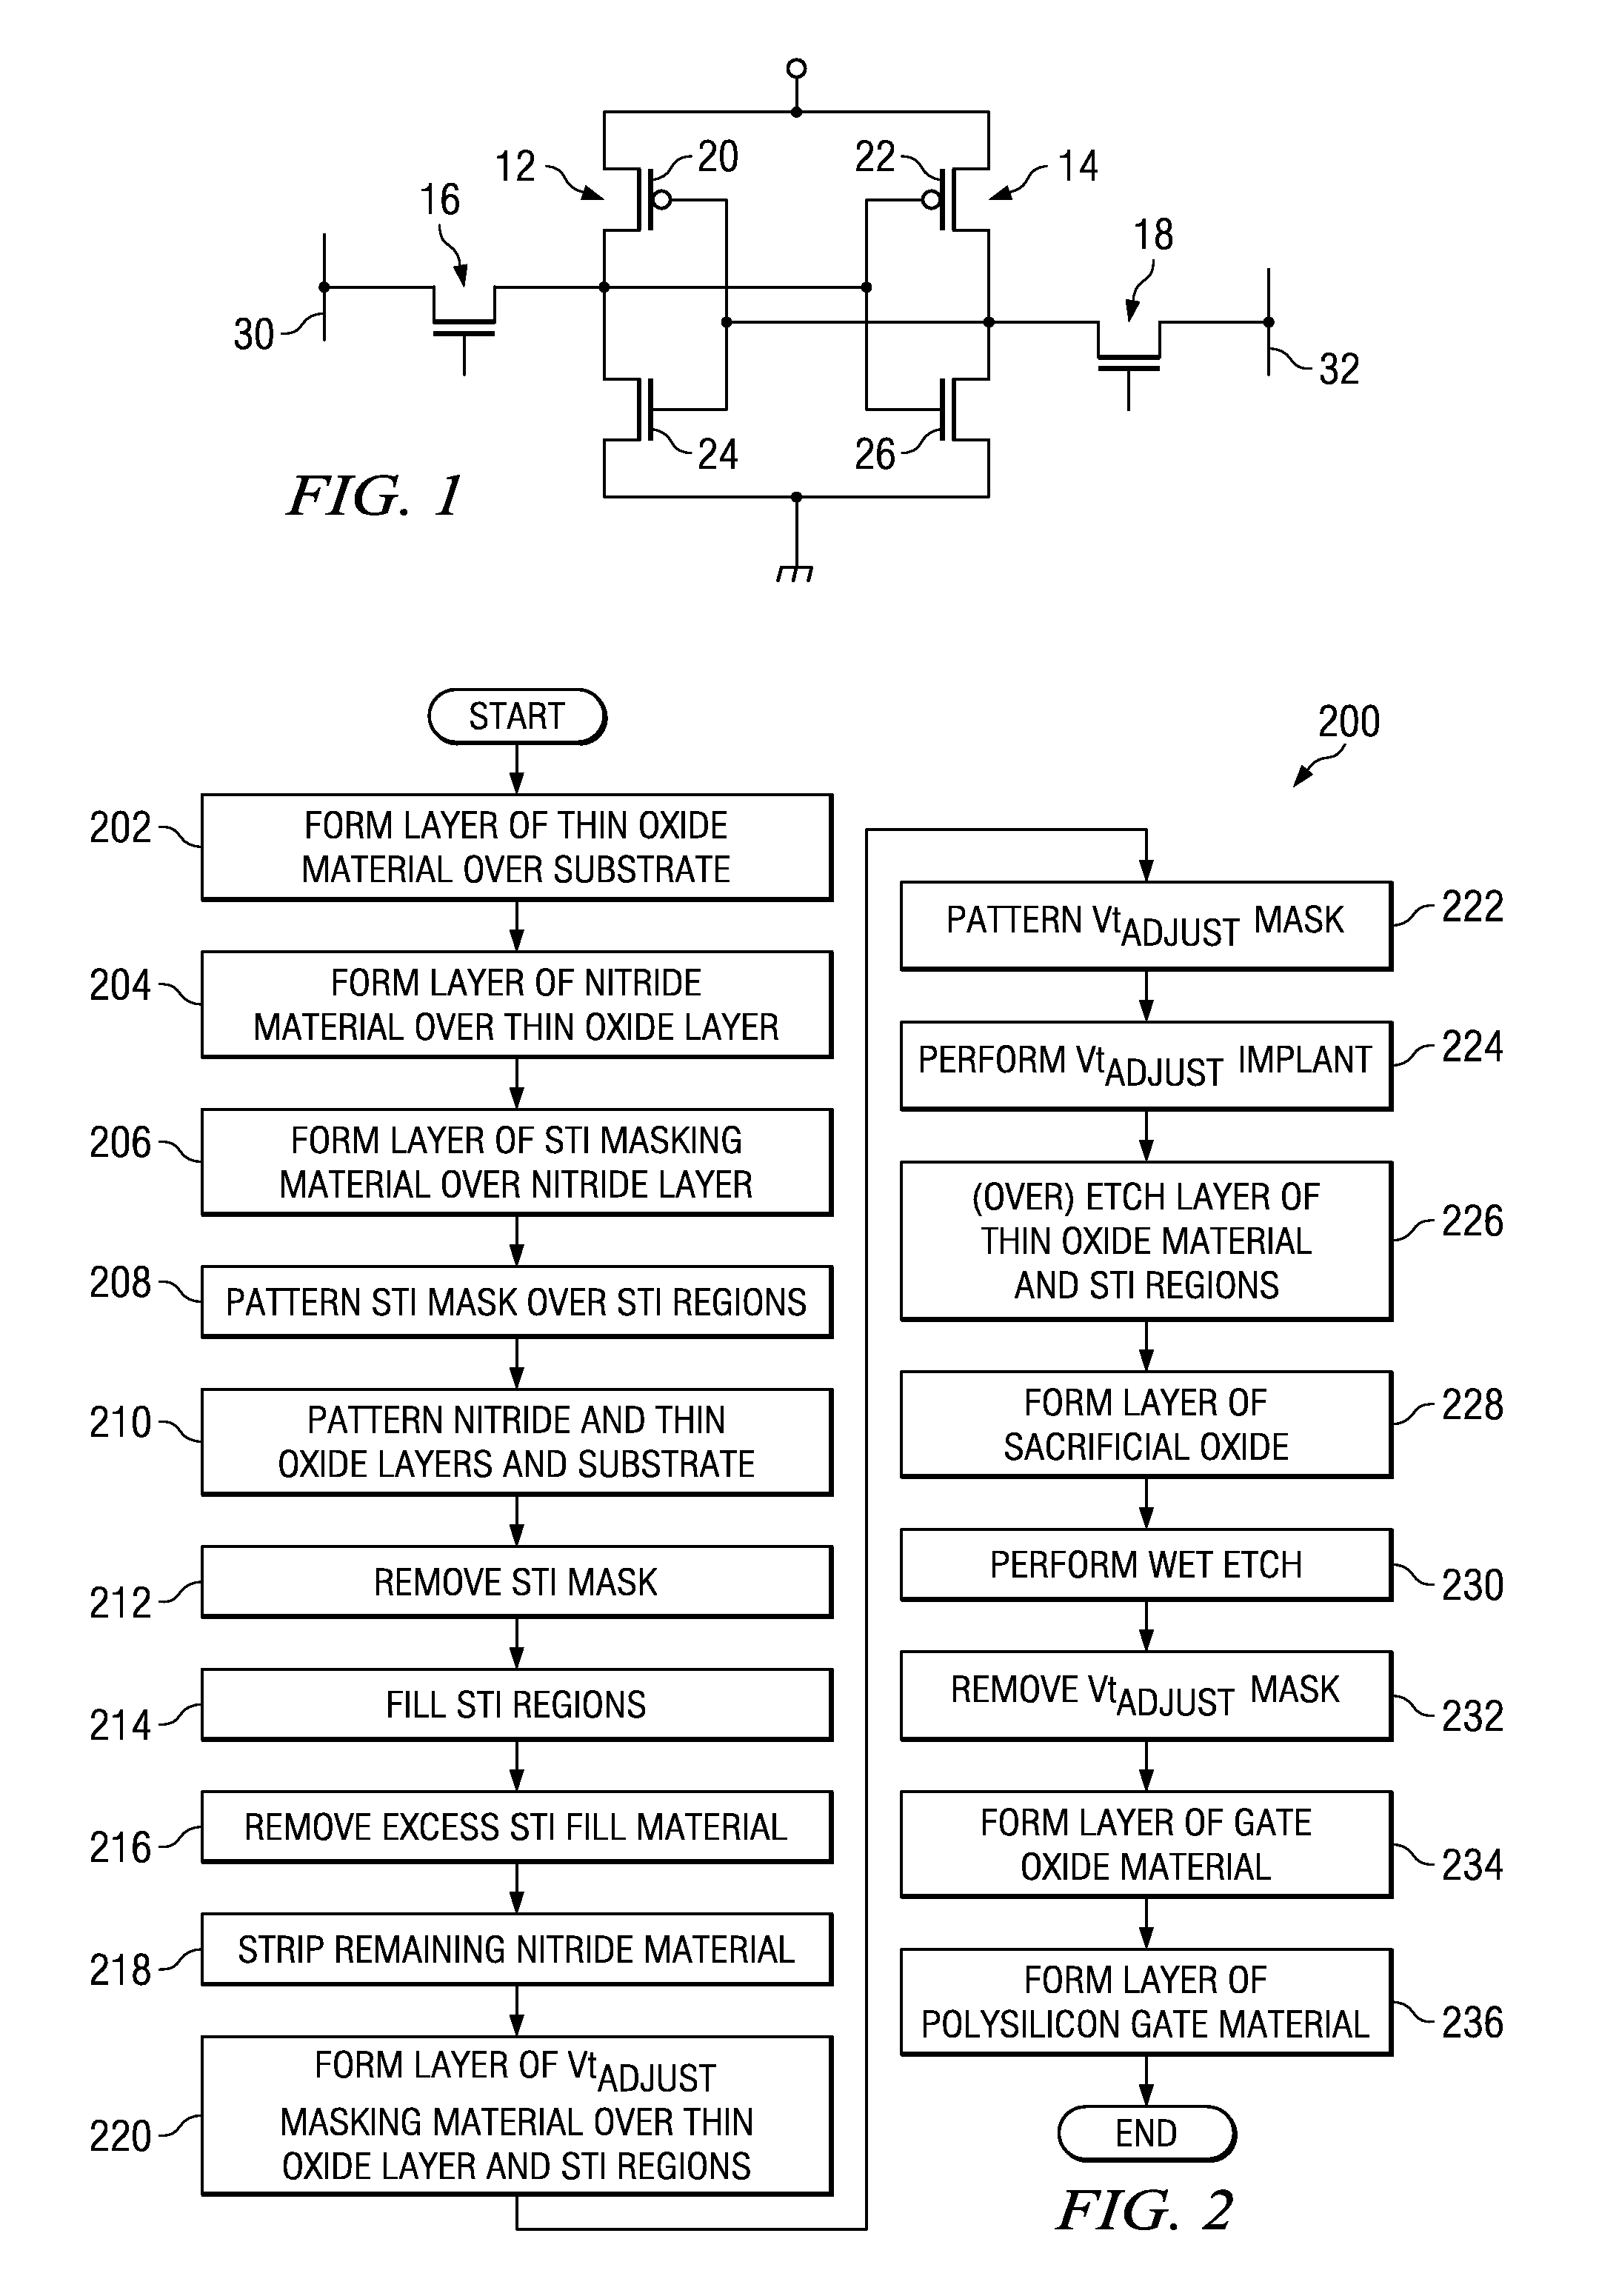 Method to improve SRAM performance and stability